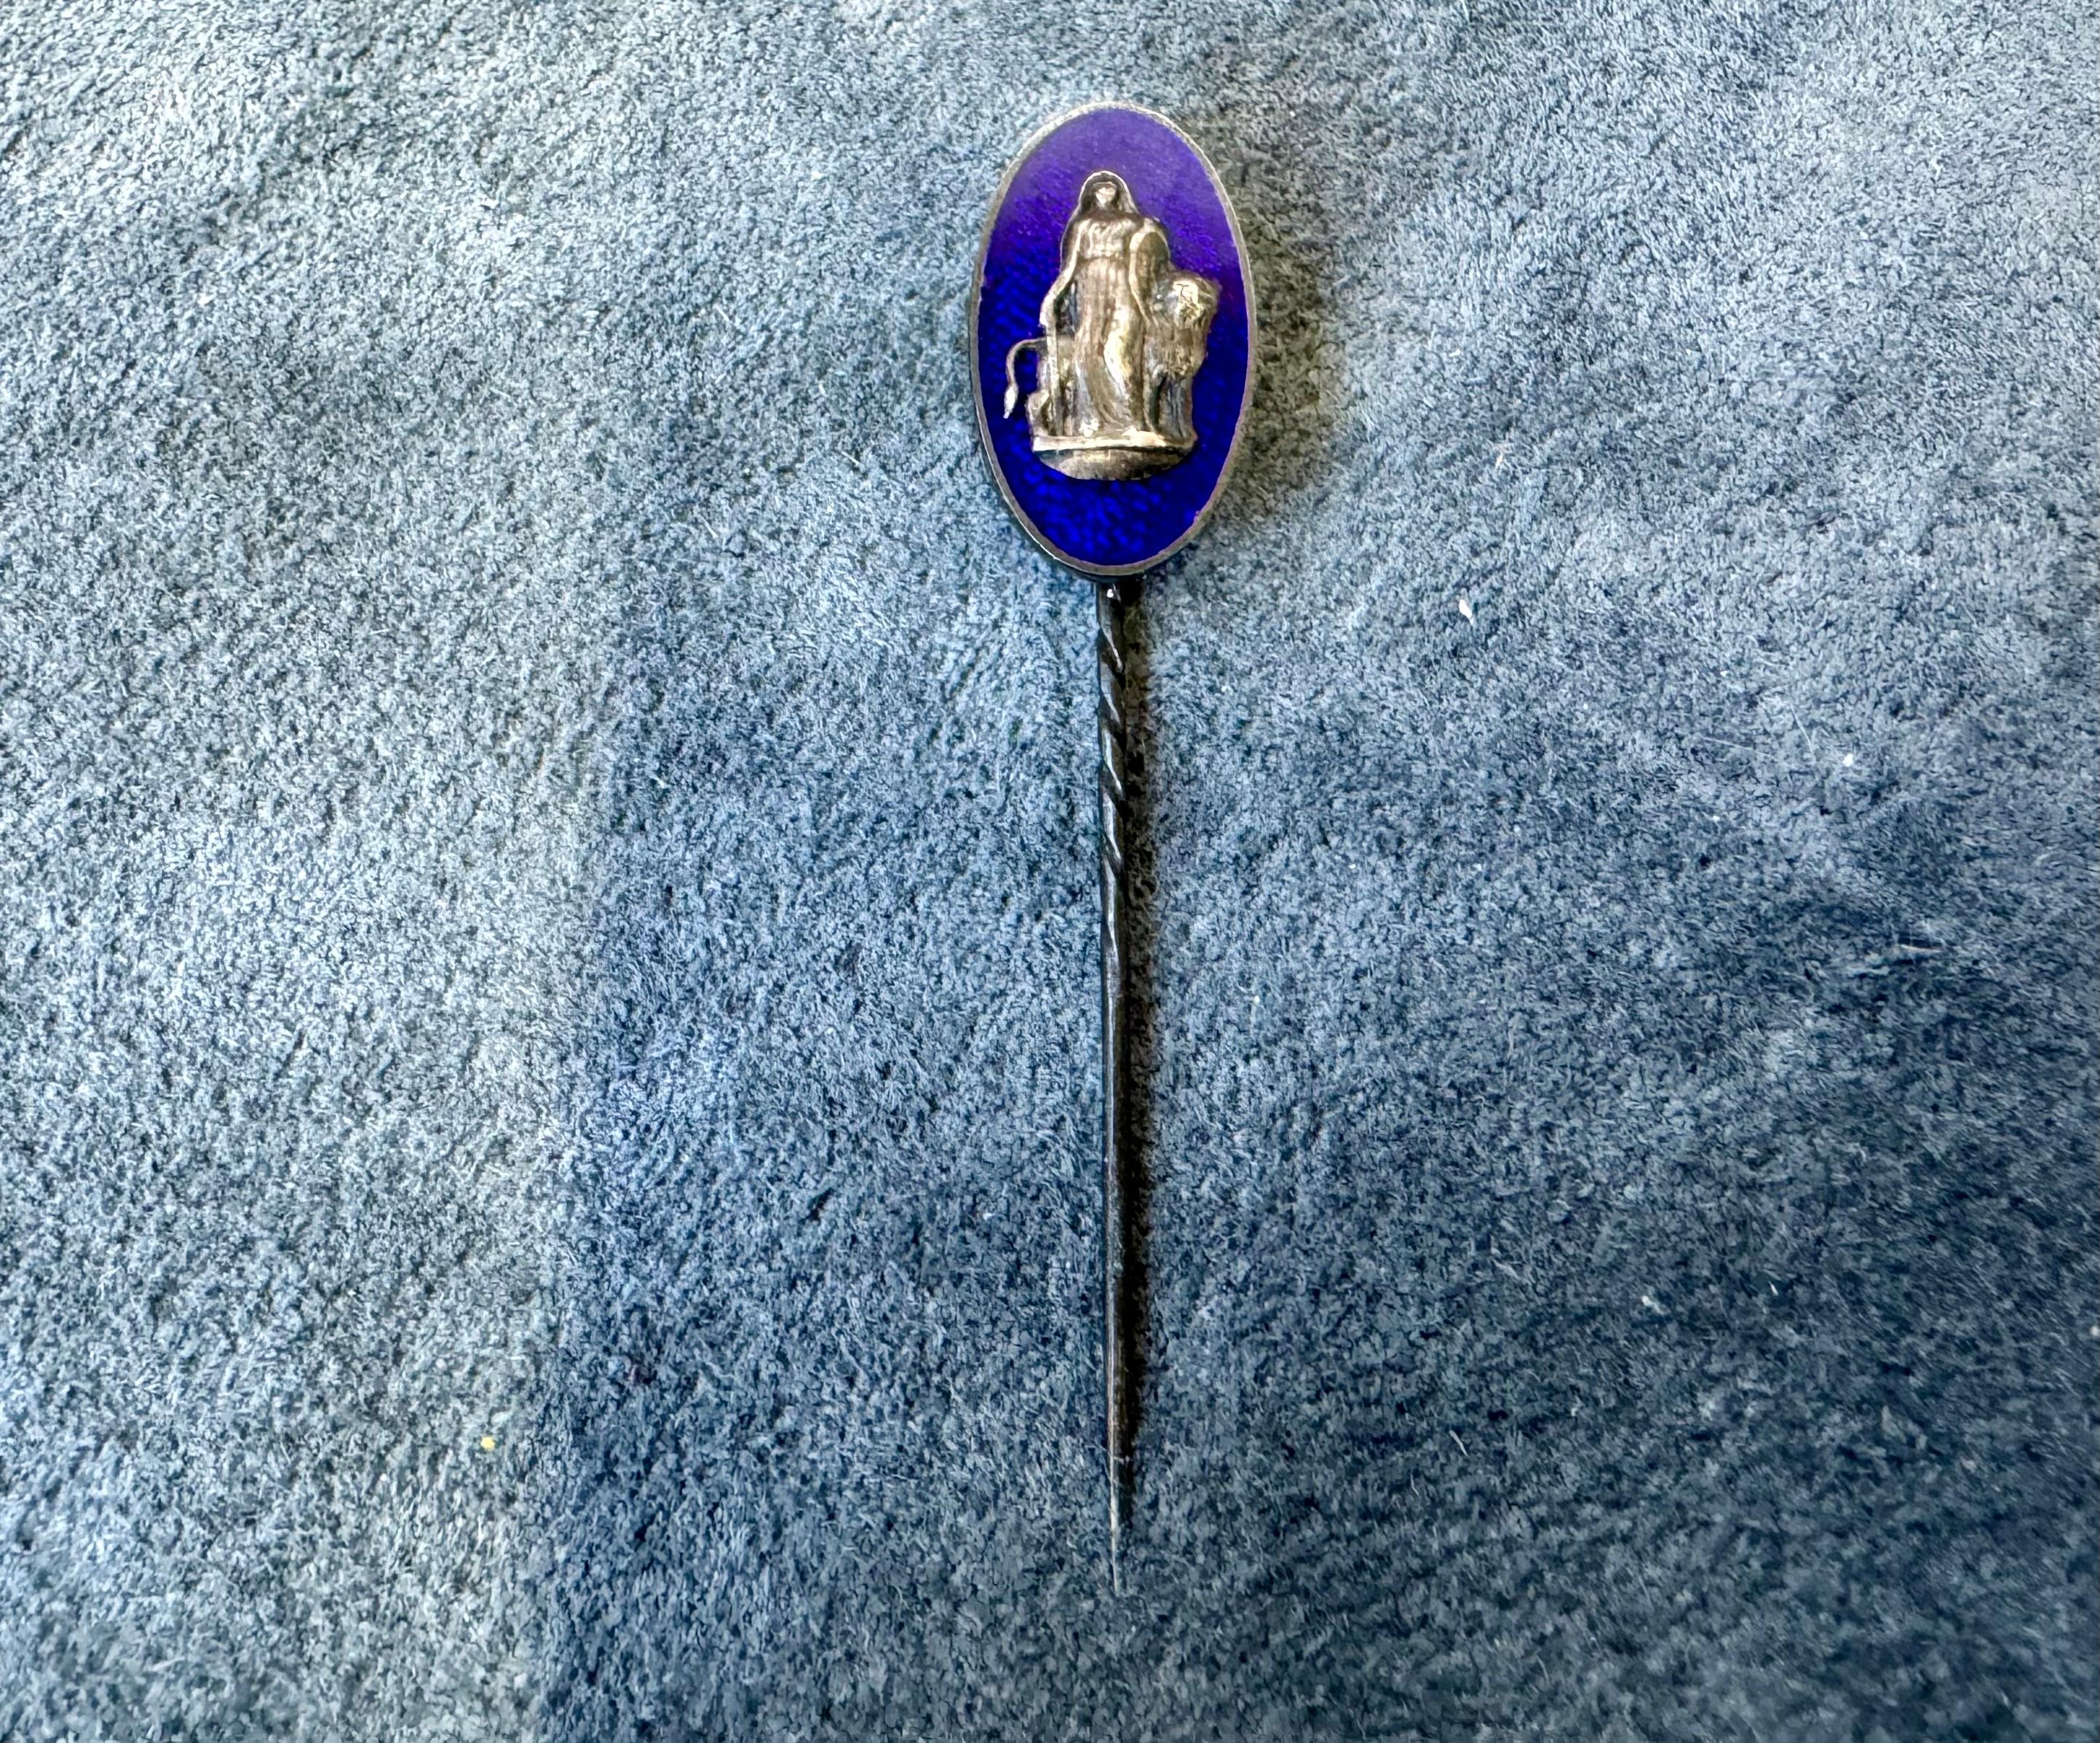 Stickpin Silver and Enamel.
Stamp 813H.
Finnish Silver Stamp.
So the needle is done between 1895-1972
813H=1895-1972

Nicely darkened, I haven't polished it.
Is there a Lawyer or a Judge Tie pin